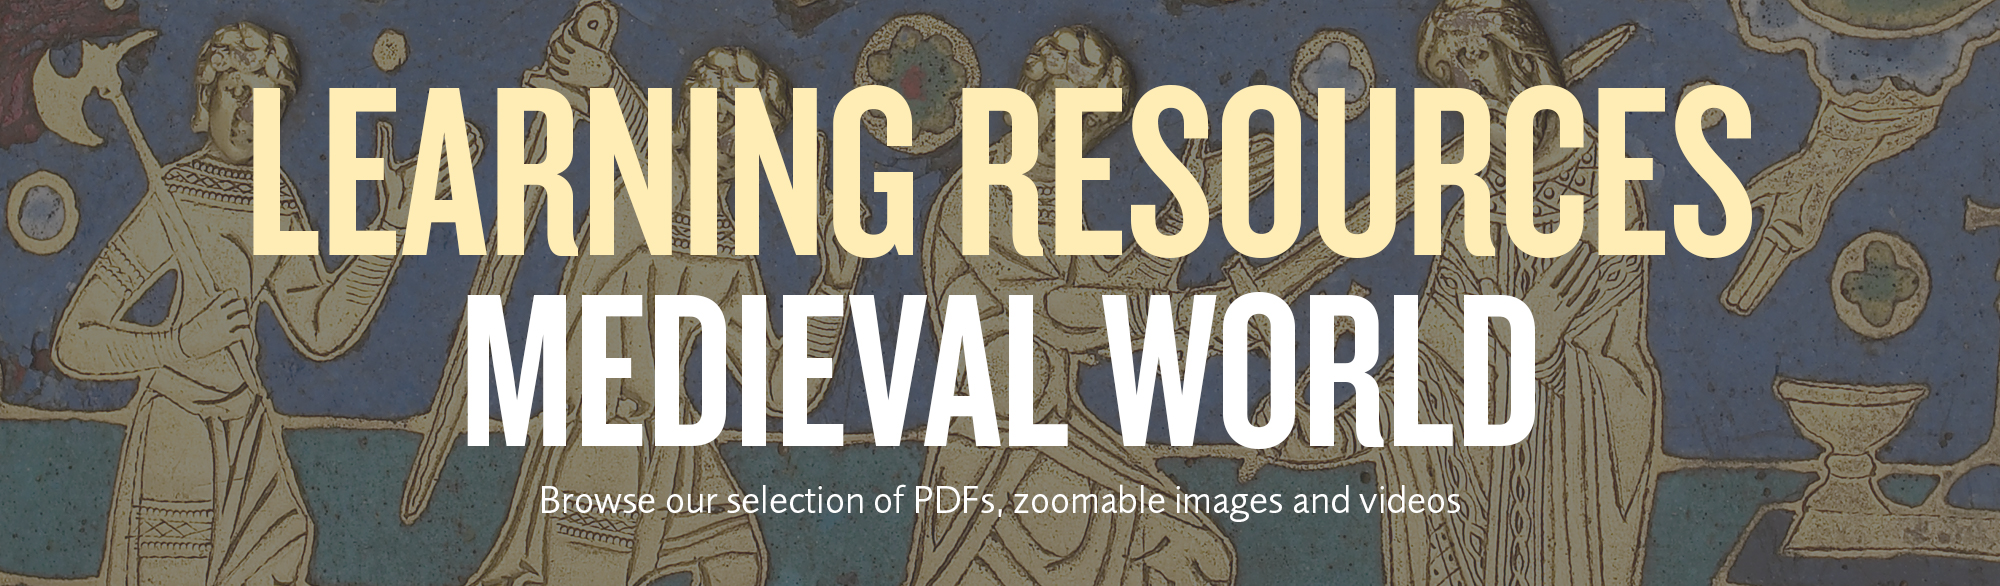 learning resource medieval world